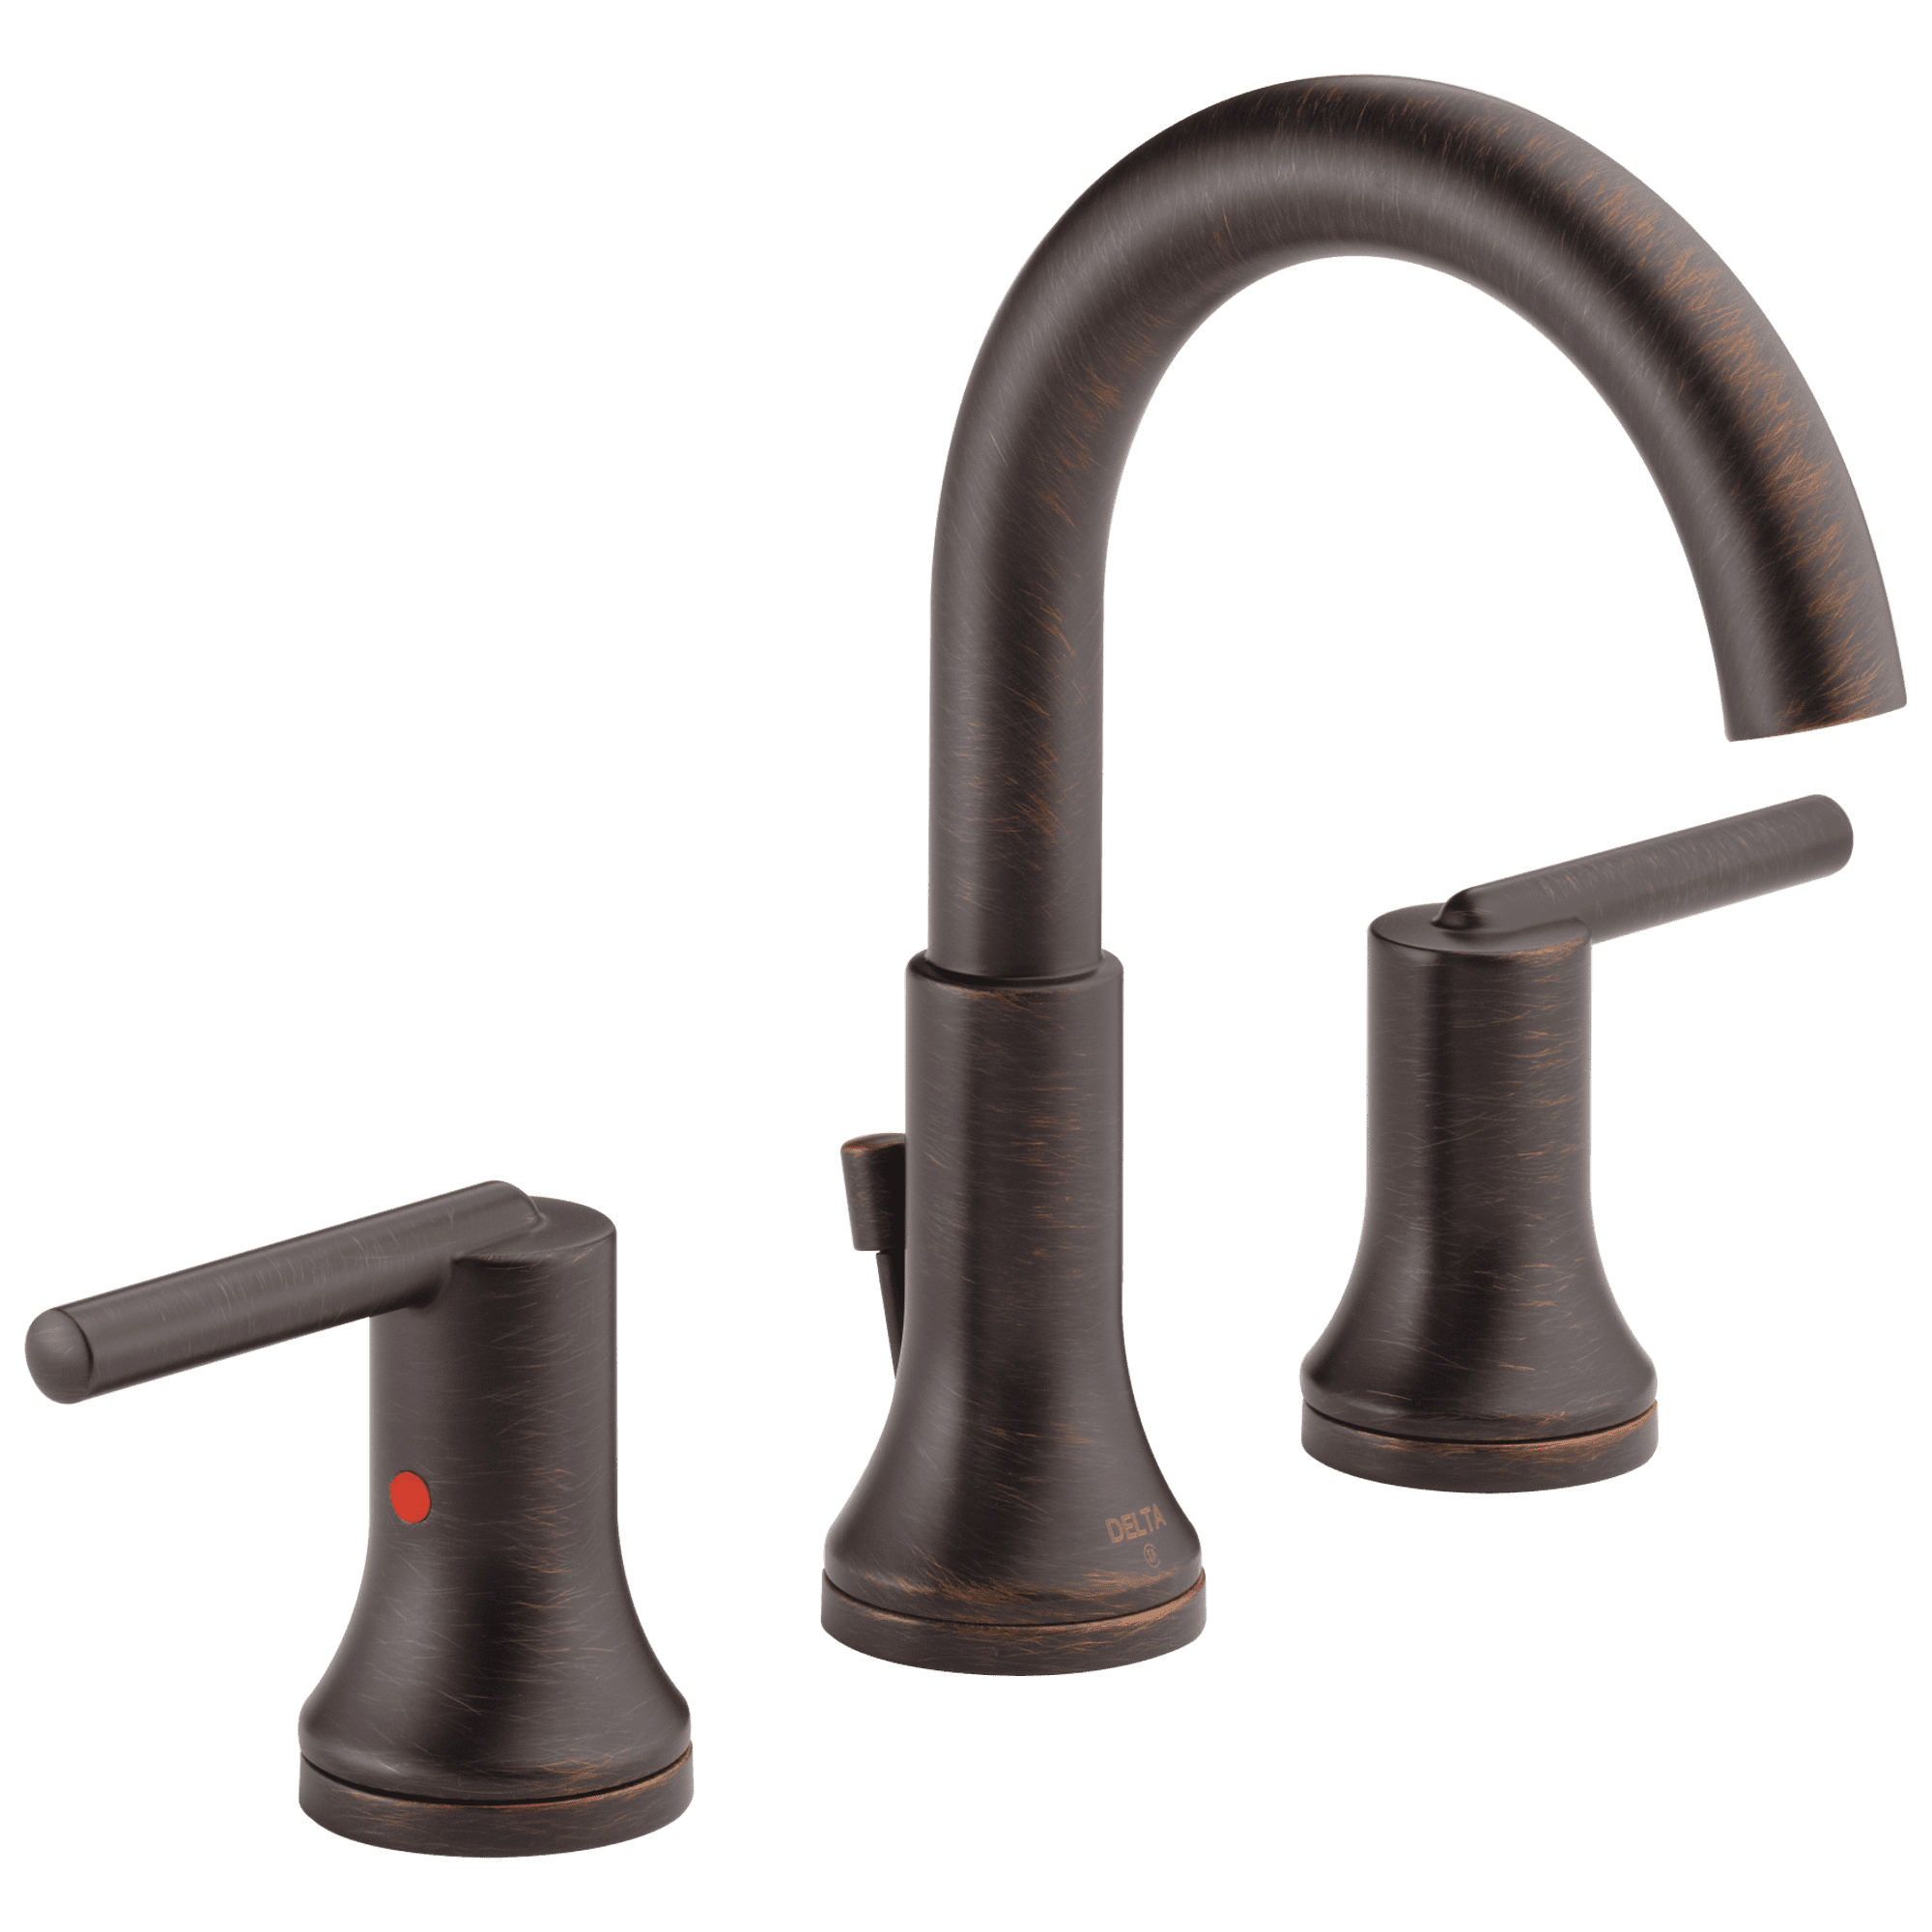 Trinsic Widespread Bathroom Faucet with Drain Assembly and DIAMOND Seal Technology